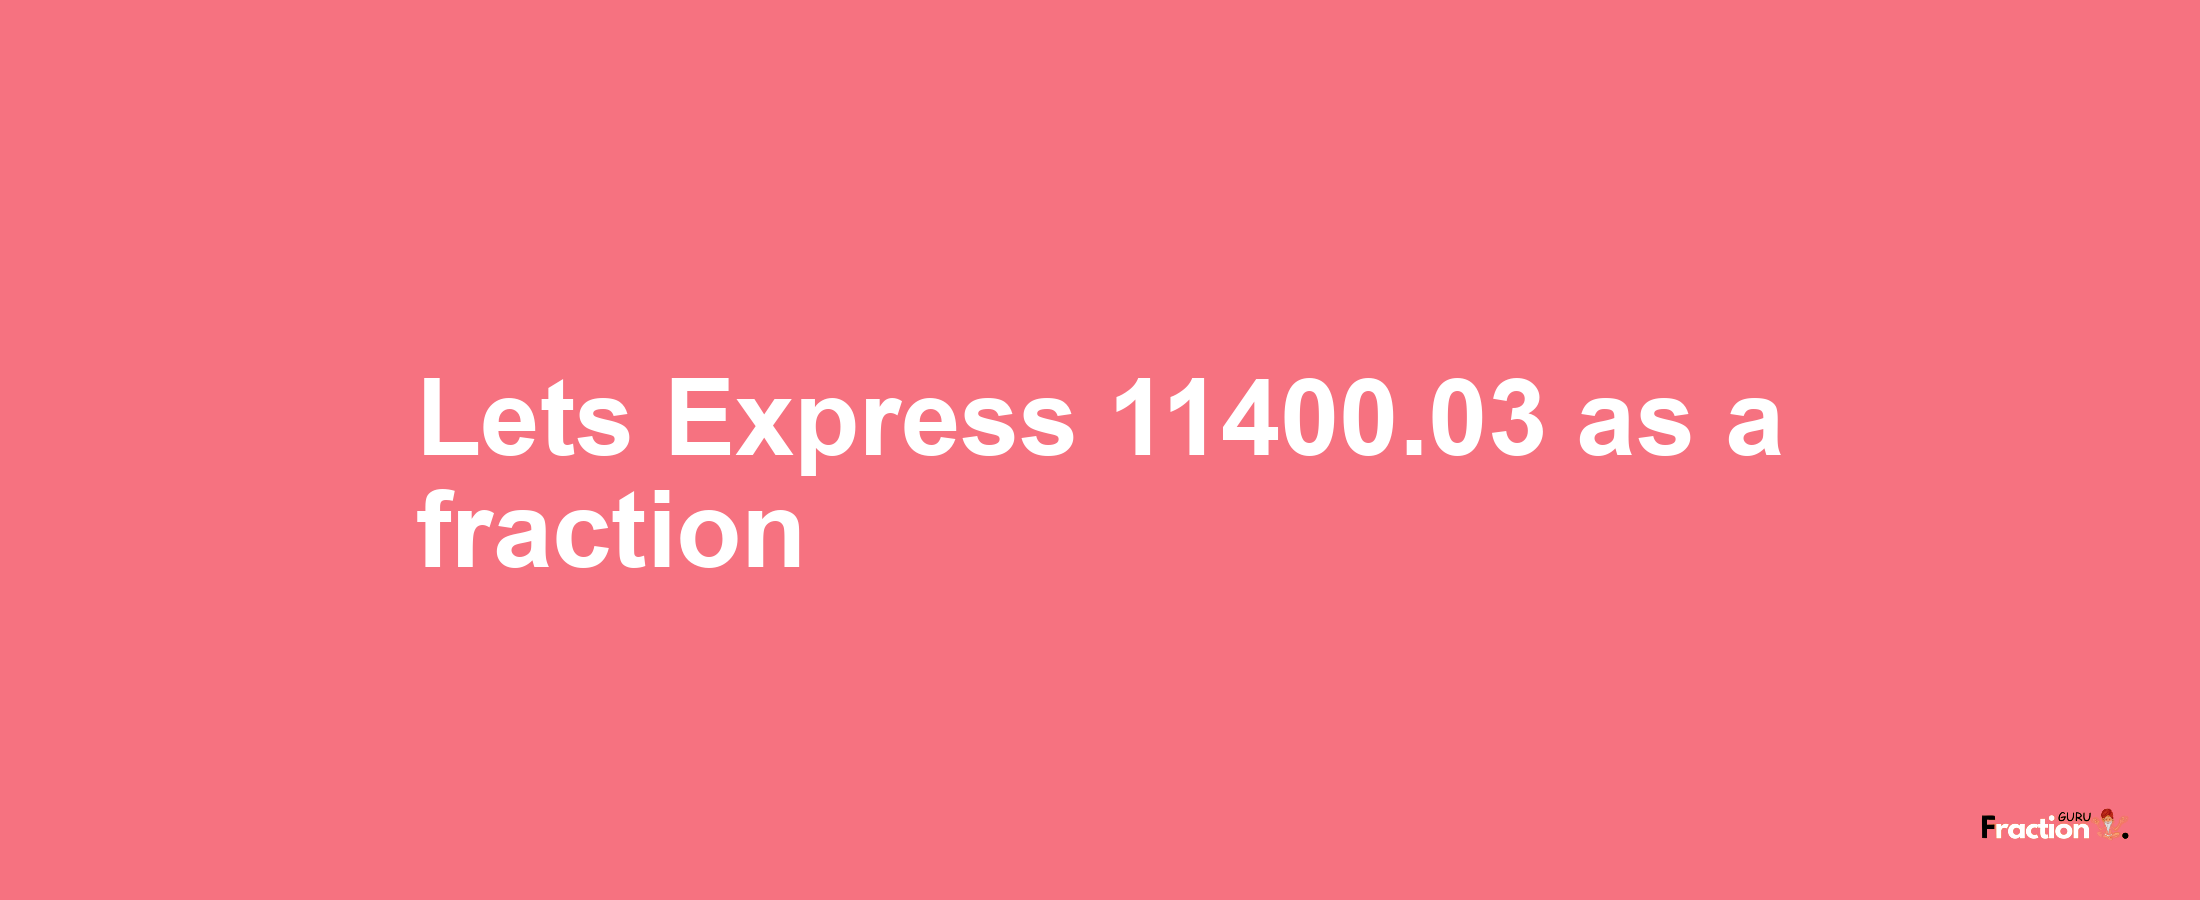 Lets Express 11400.03 as afraction